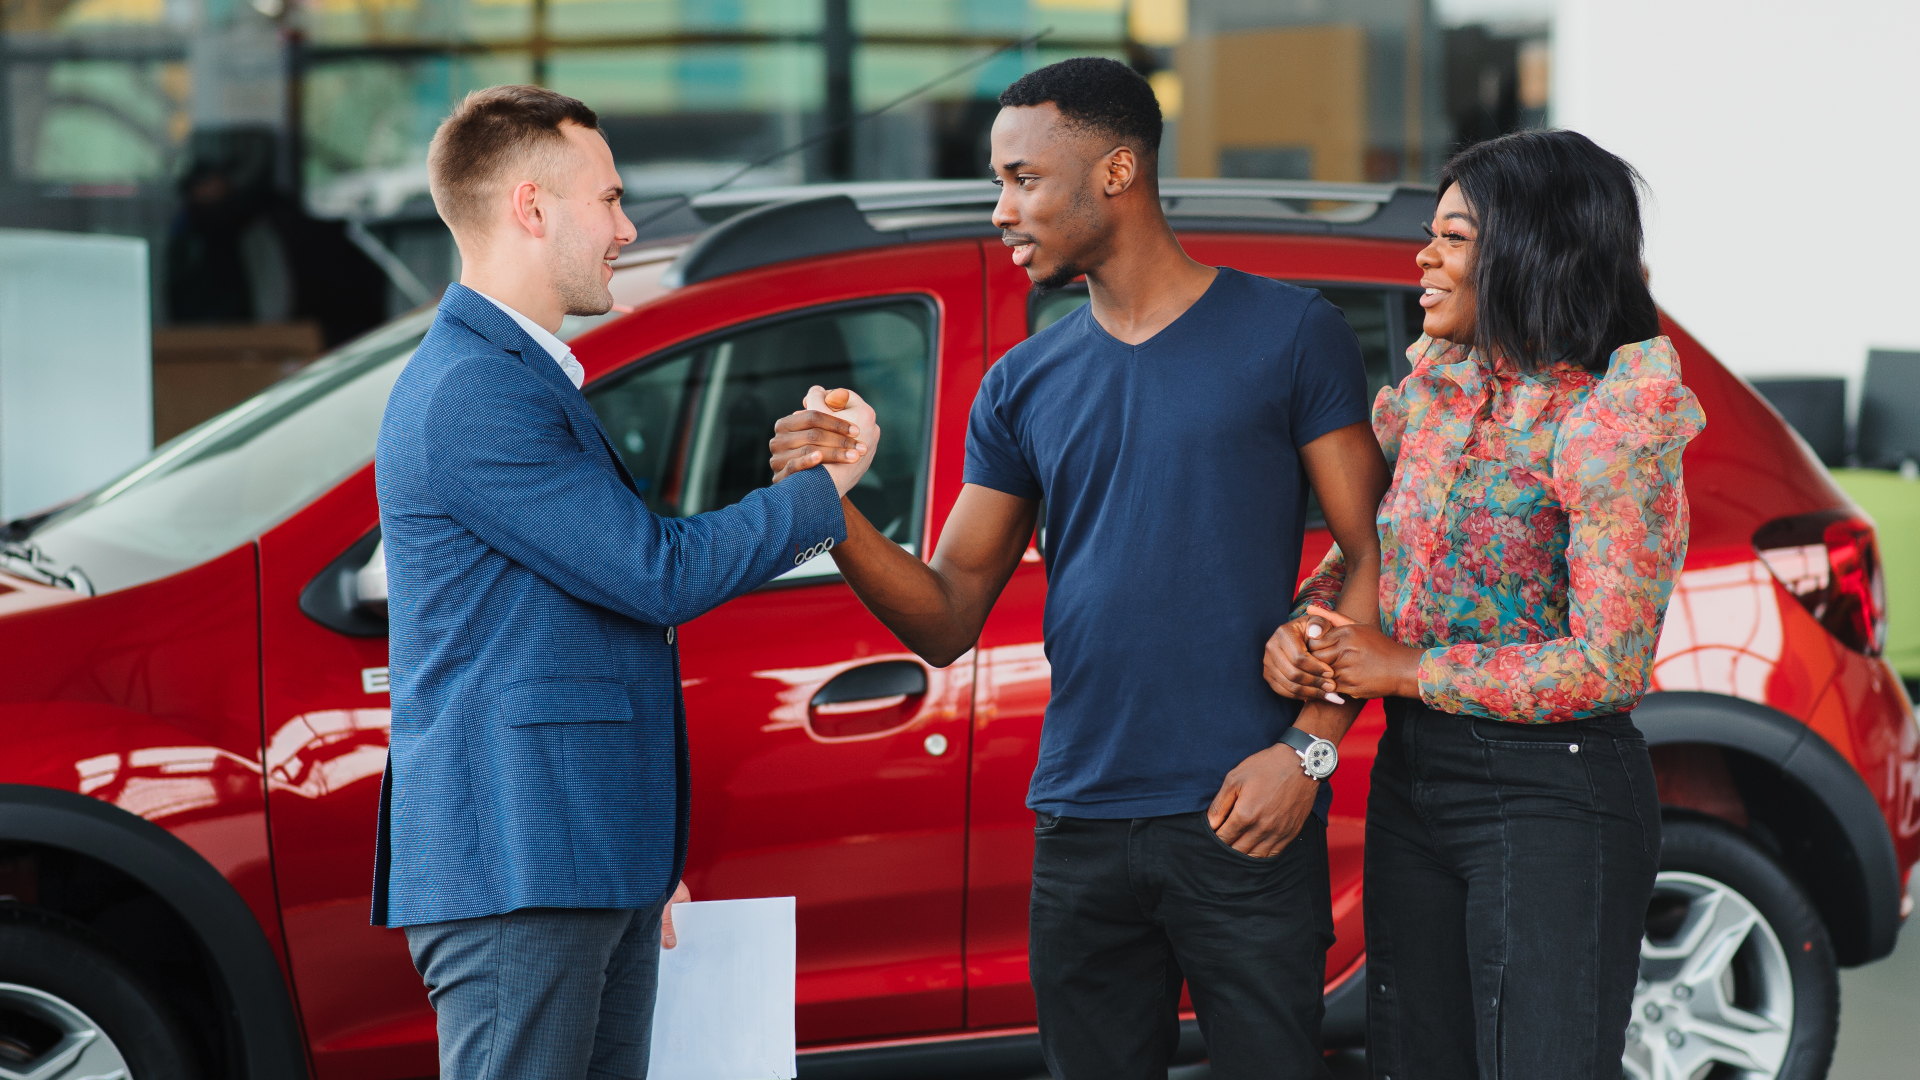 How Automotive Dealerships Can Harness ADVAGY for Customer Attraction